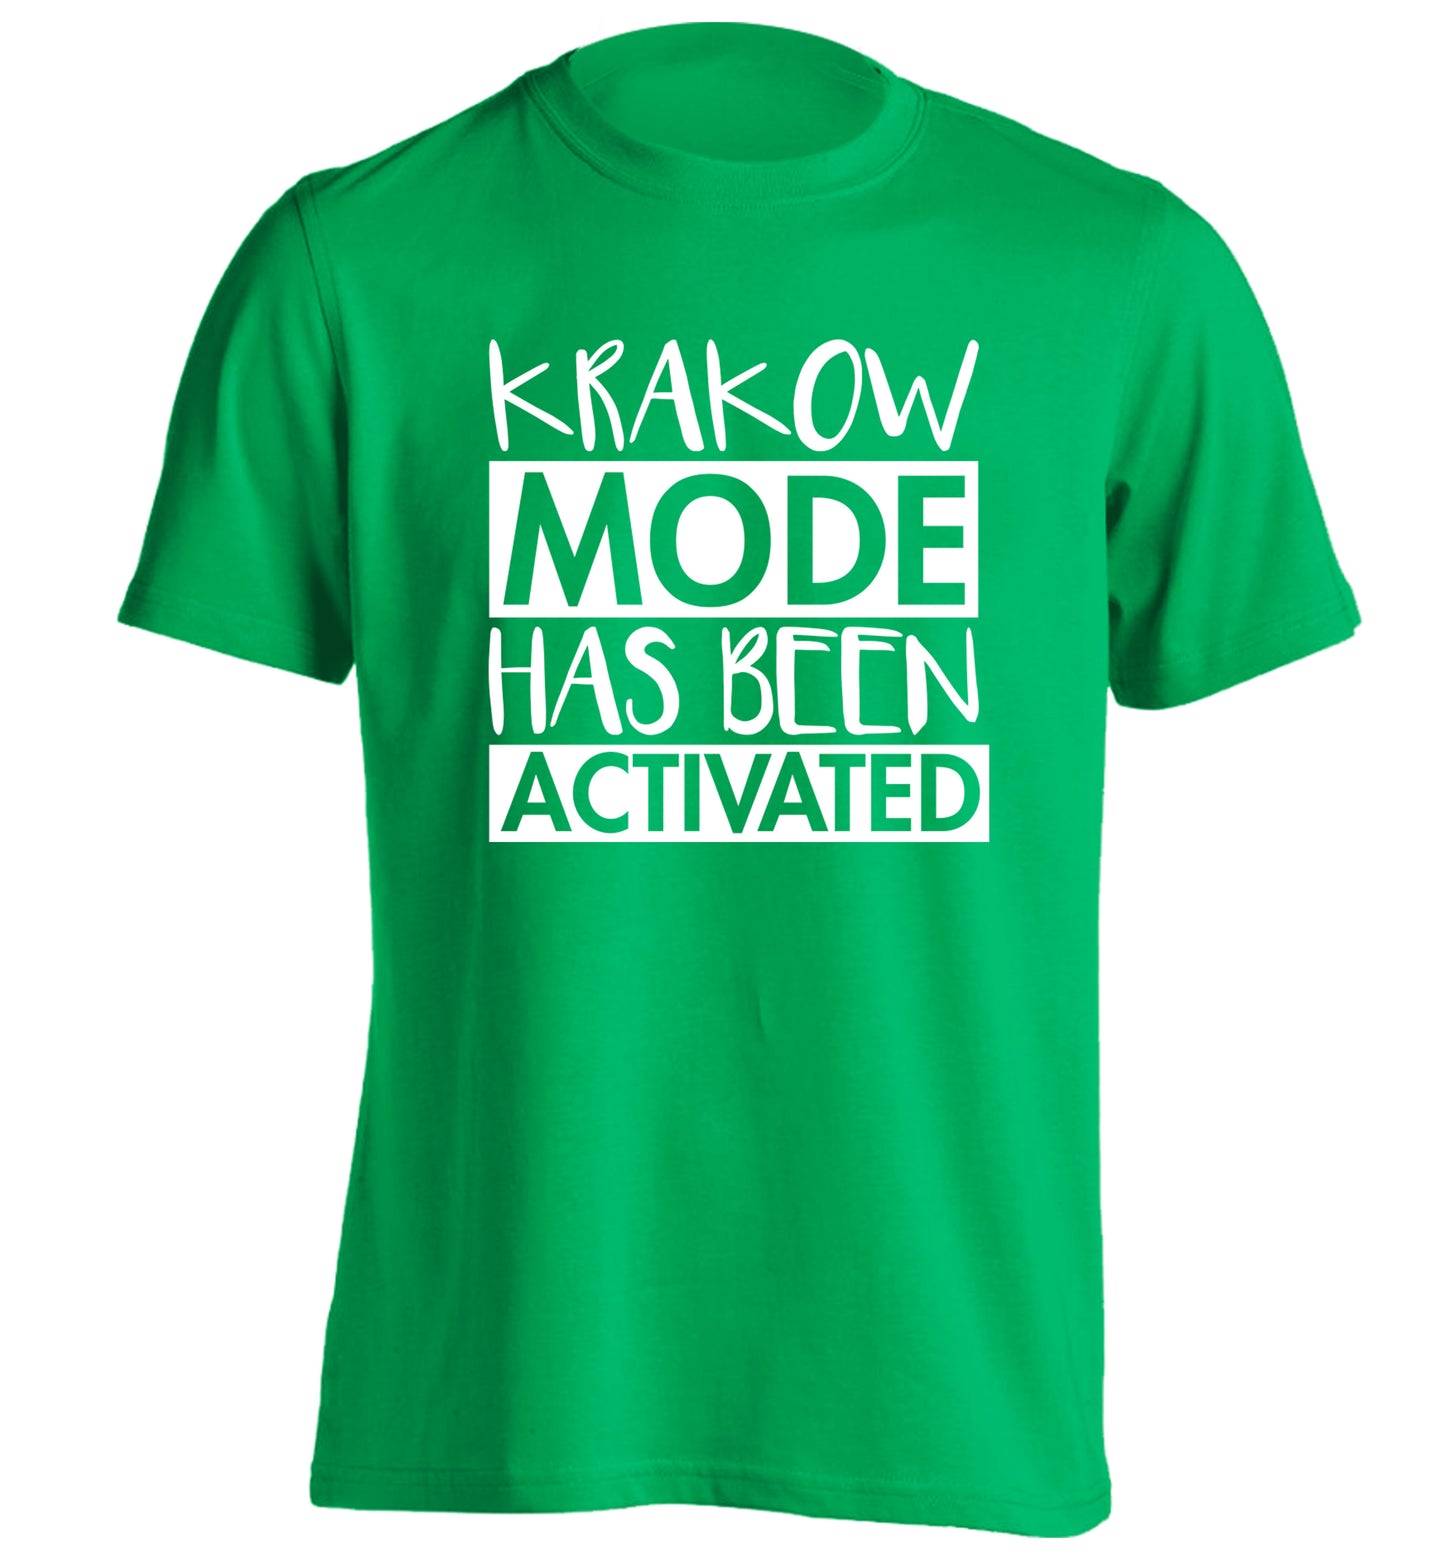 Krakow mode has been activated adults unisex green Tshirt 2XL